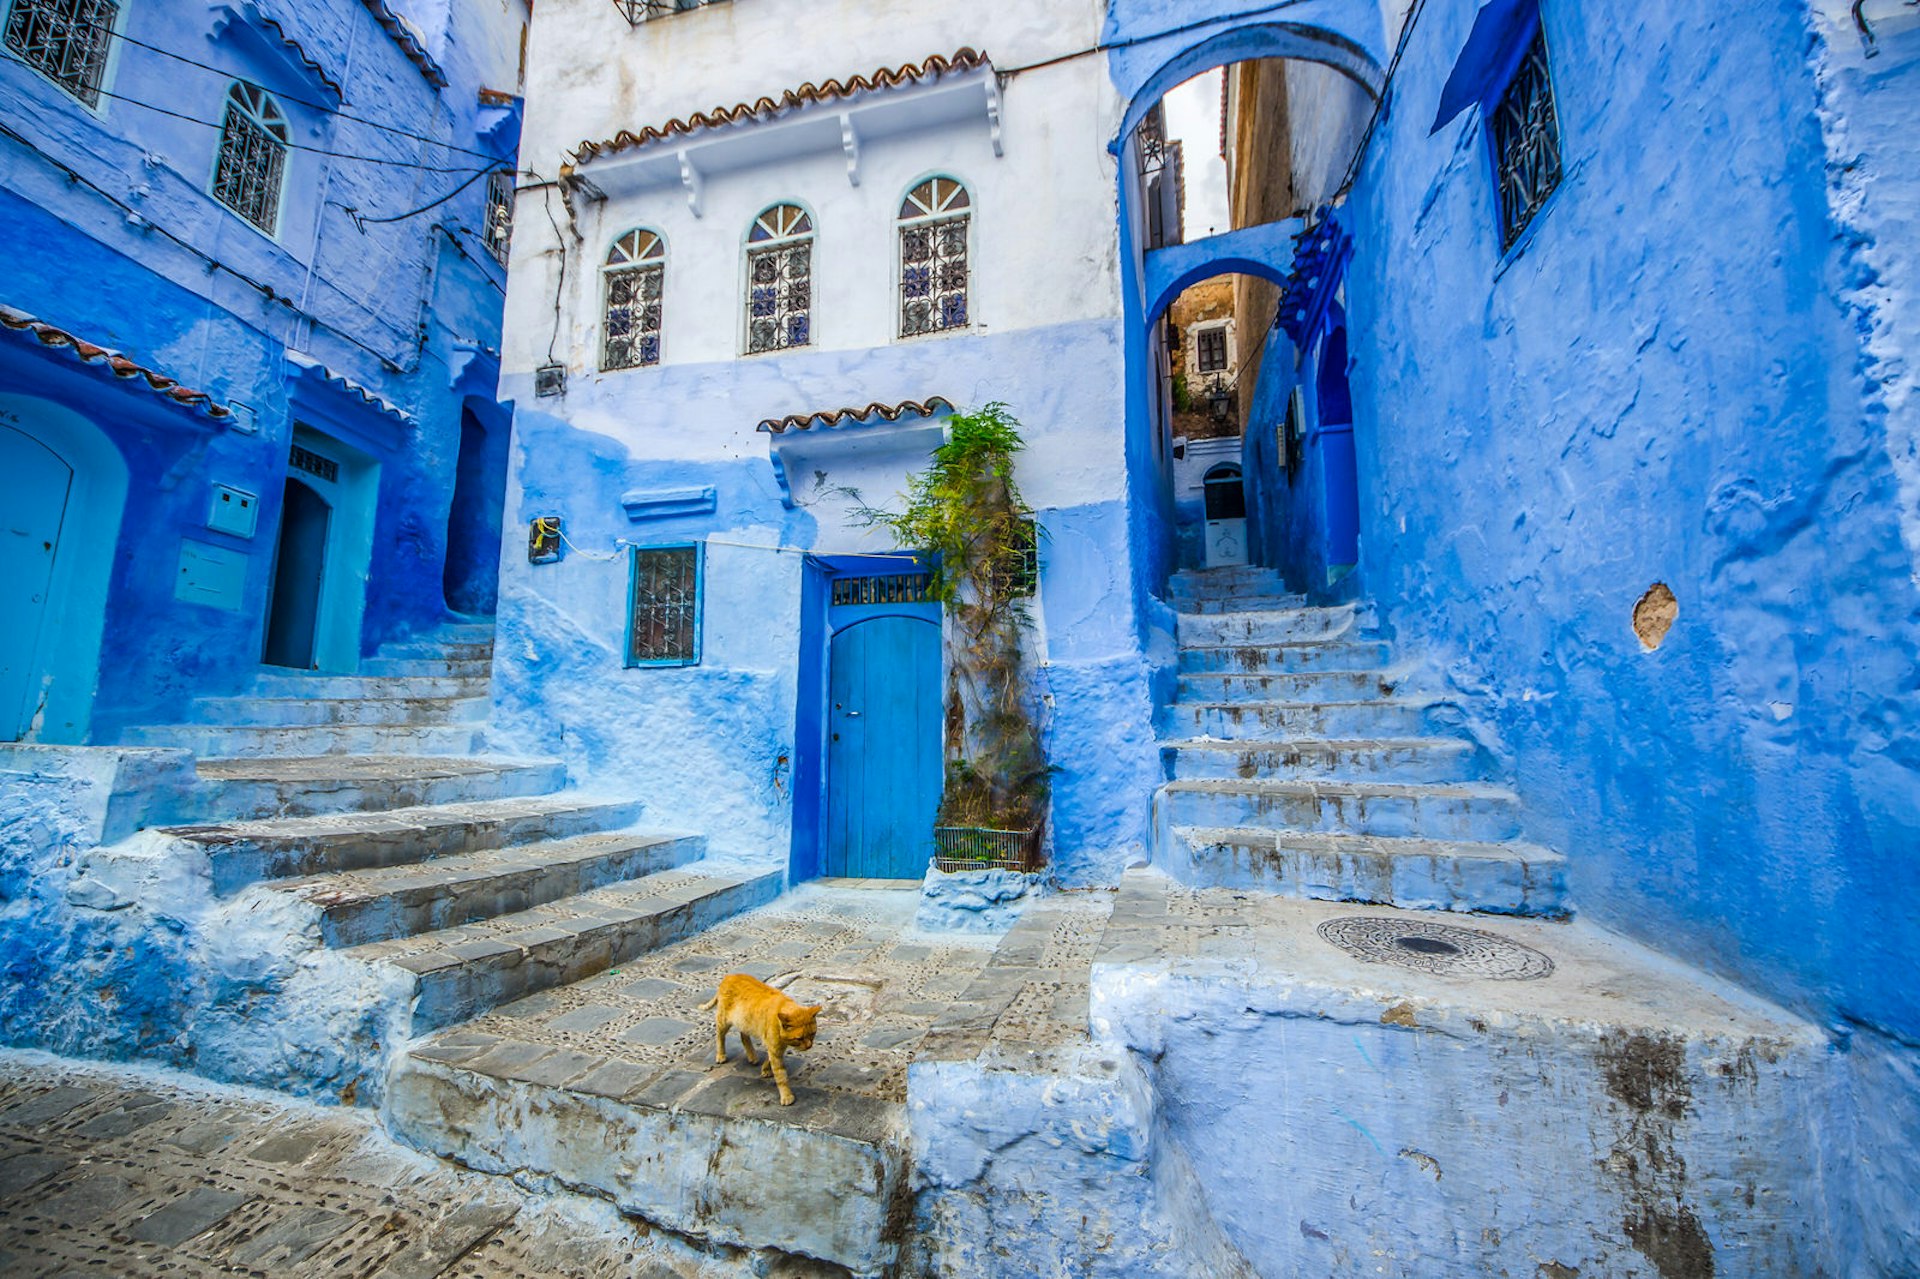 Cat wandering through the streets of the famous blue city of Chefchaouen, Morocco. Image by komyvgory / Getty Images